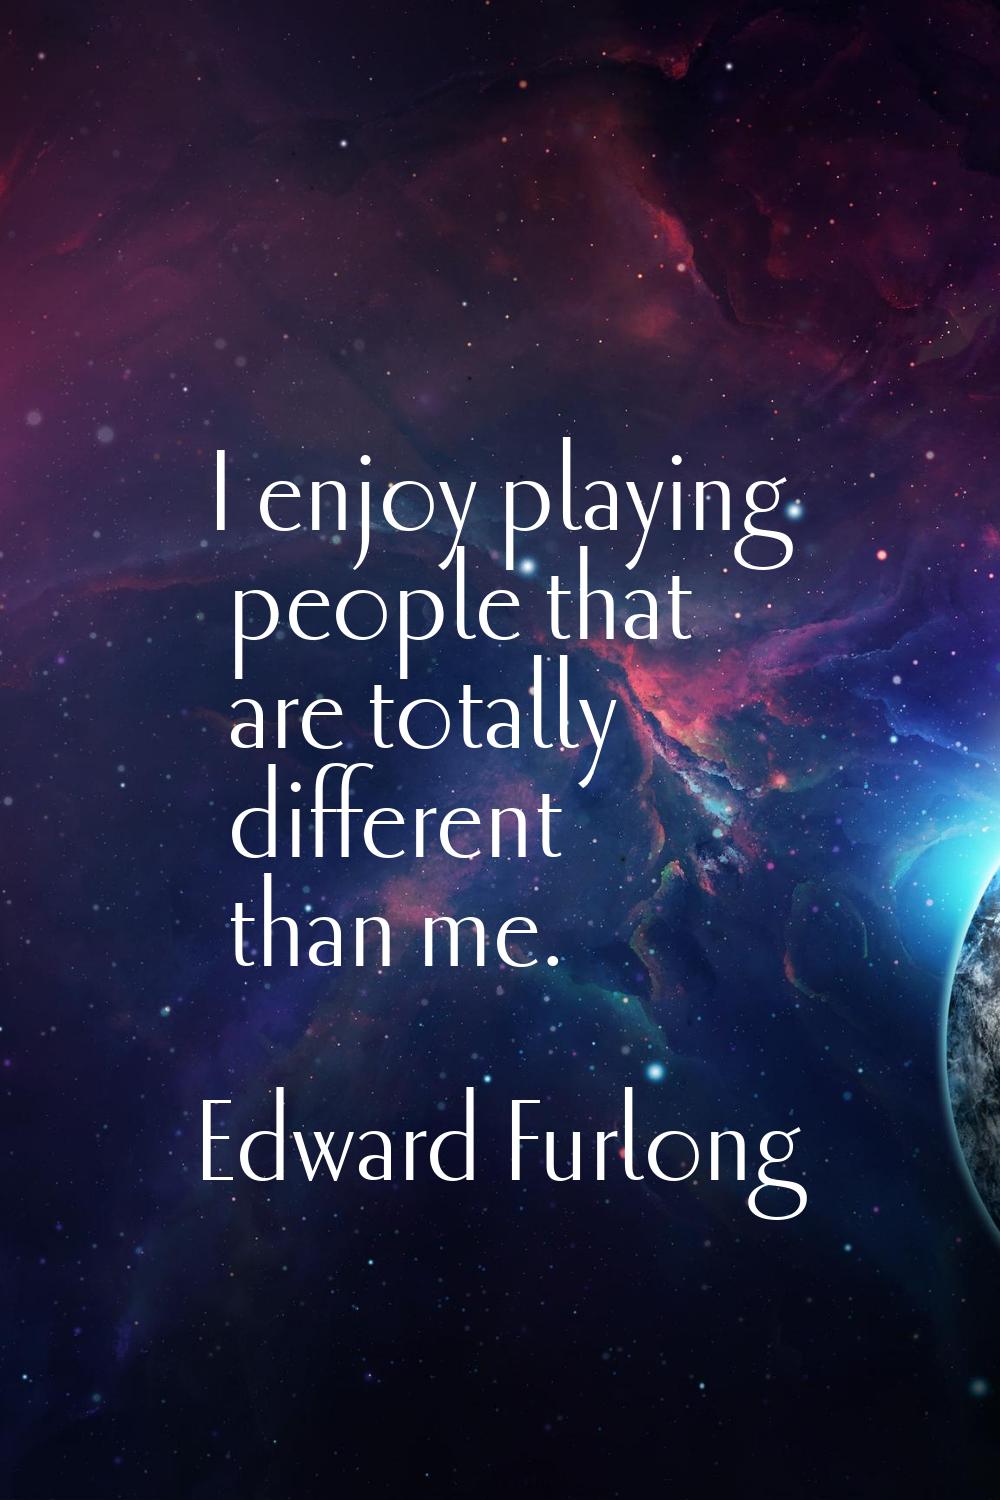 I enjoy playing people that are totally different than me.